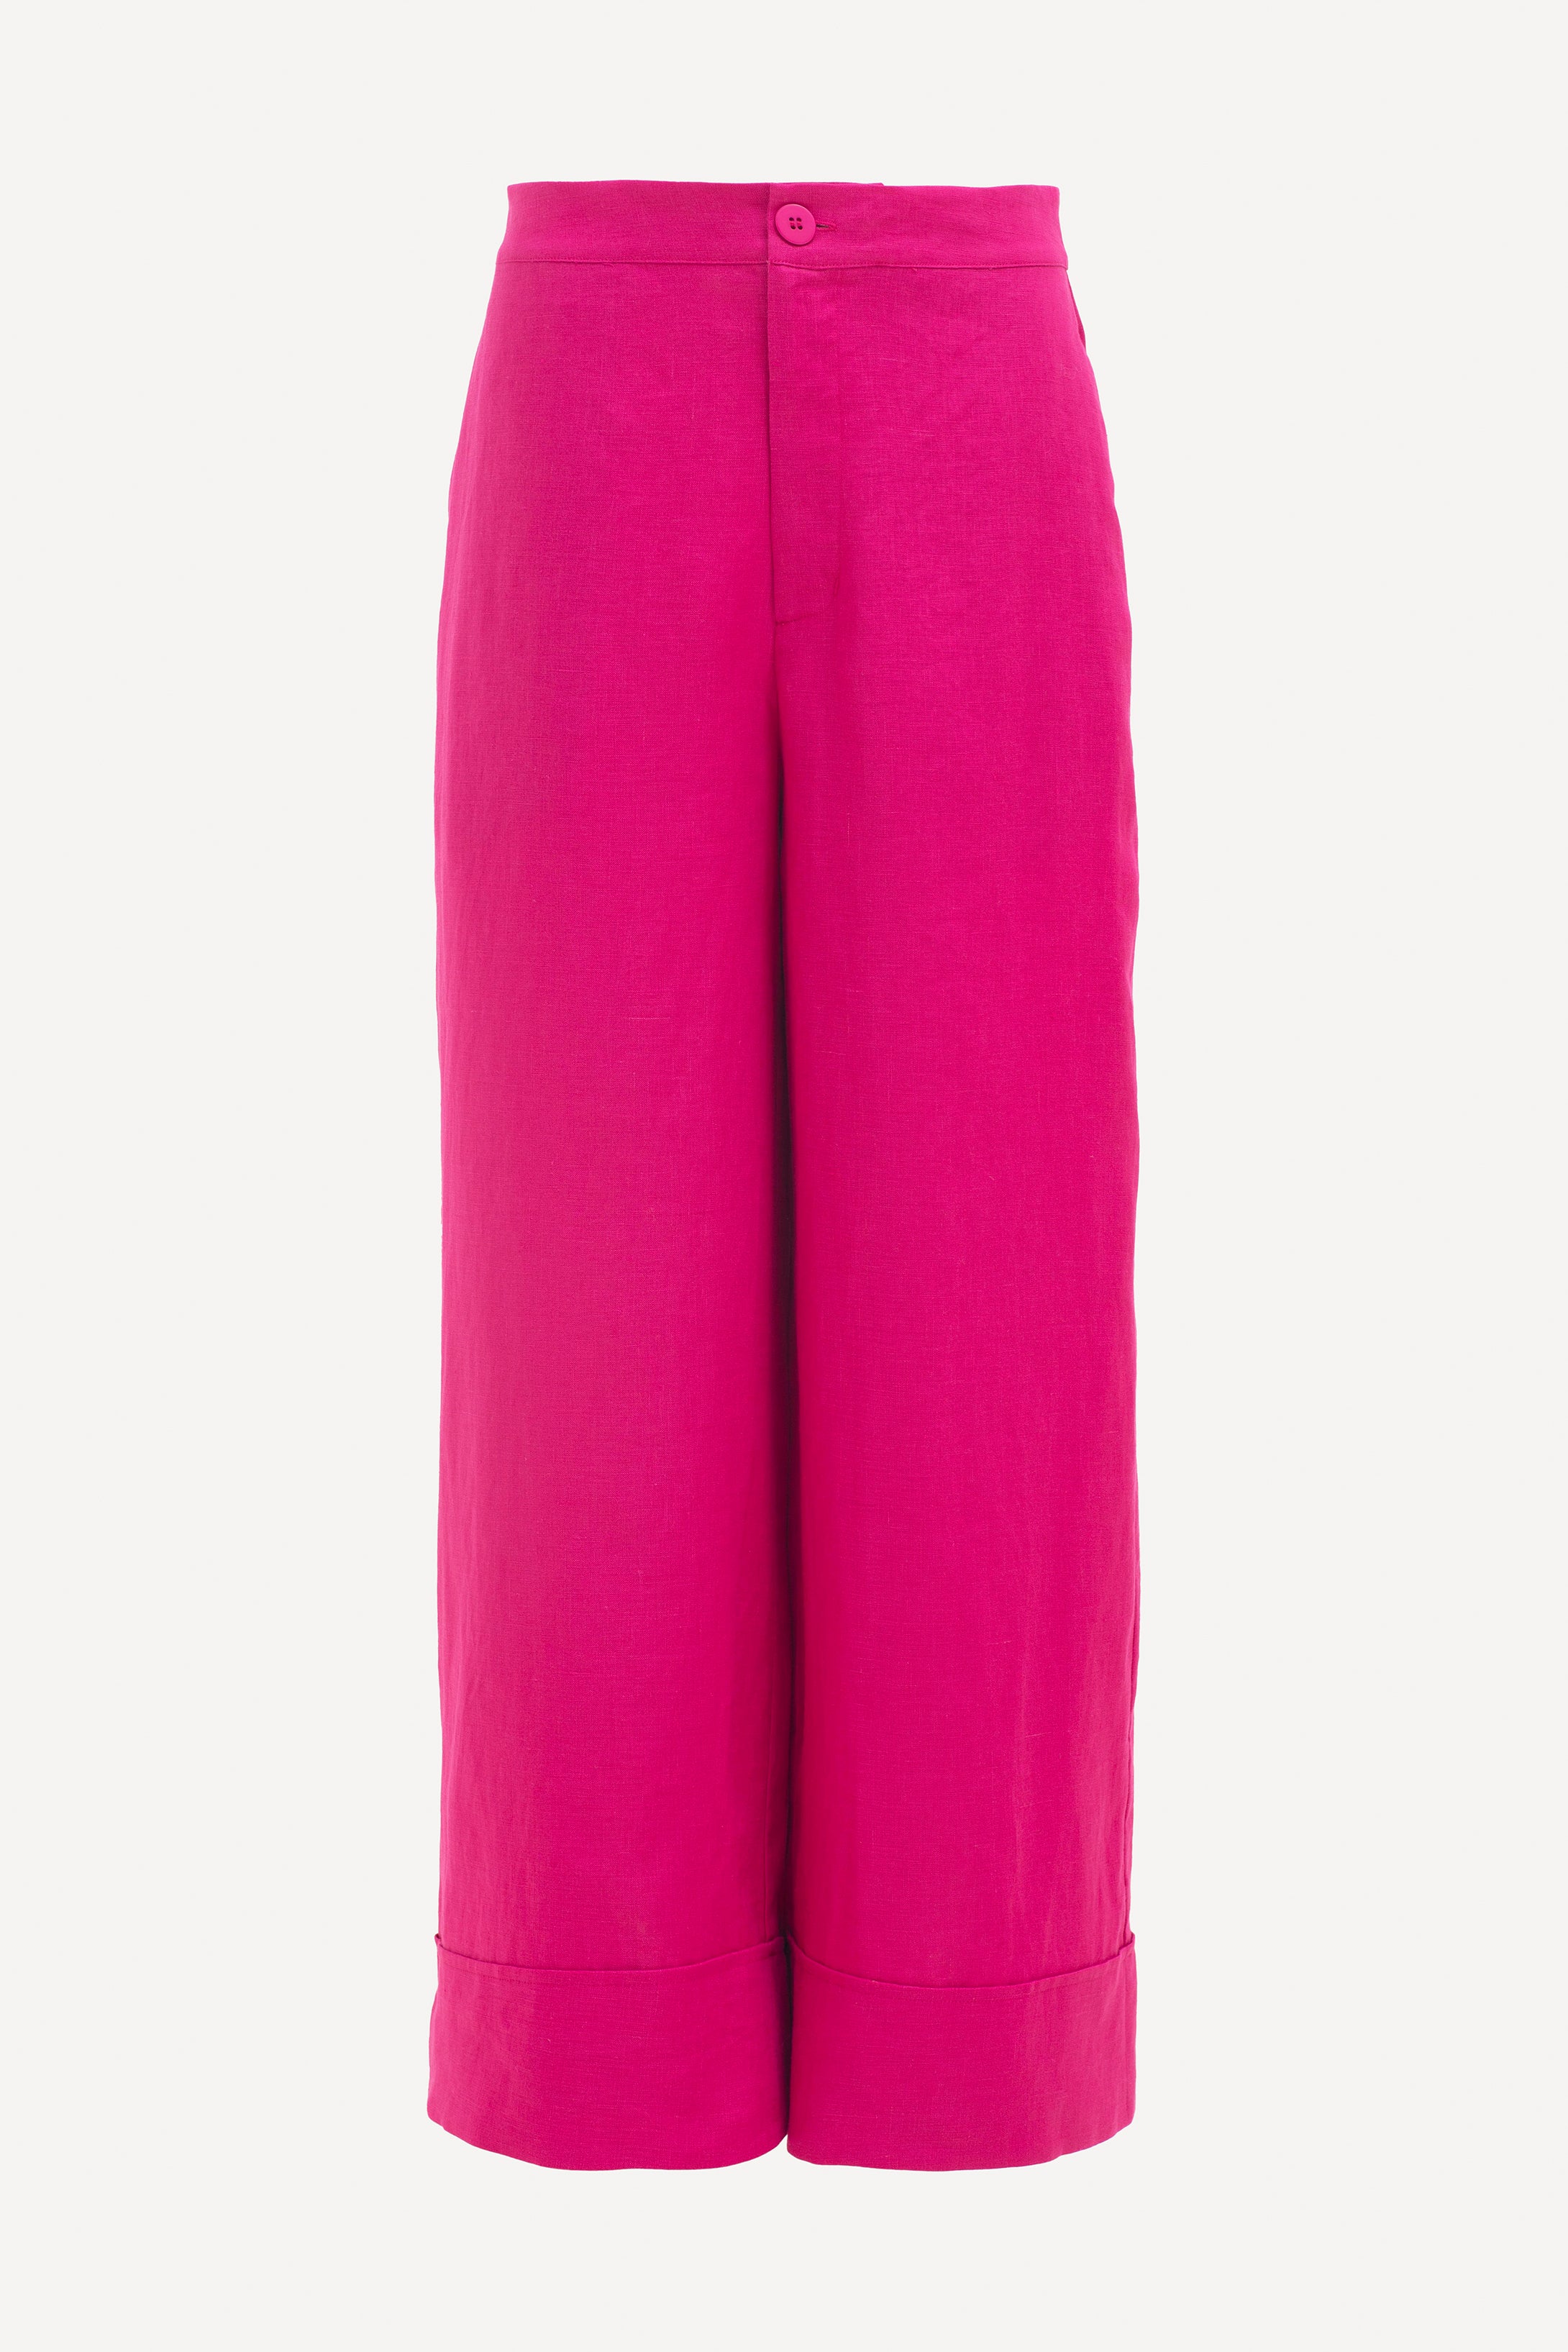 Elk Anneli Pant Bright Pink – Hall Concept Store